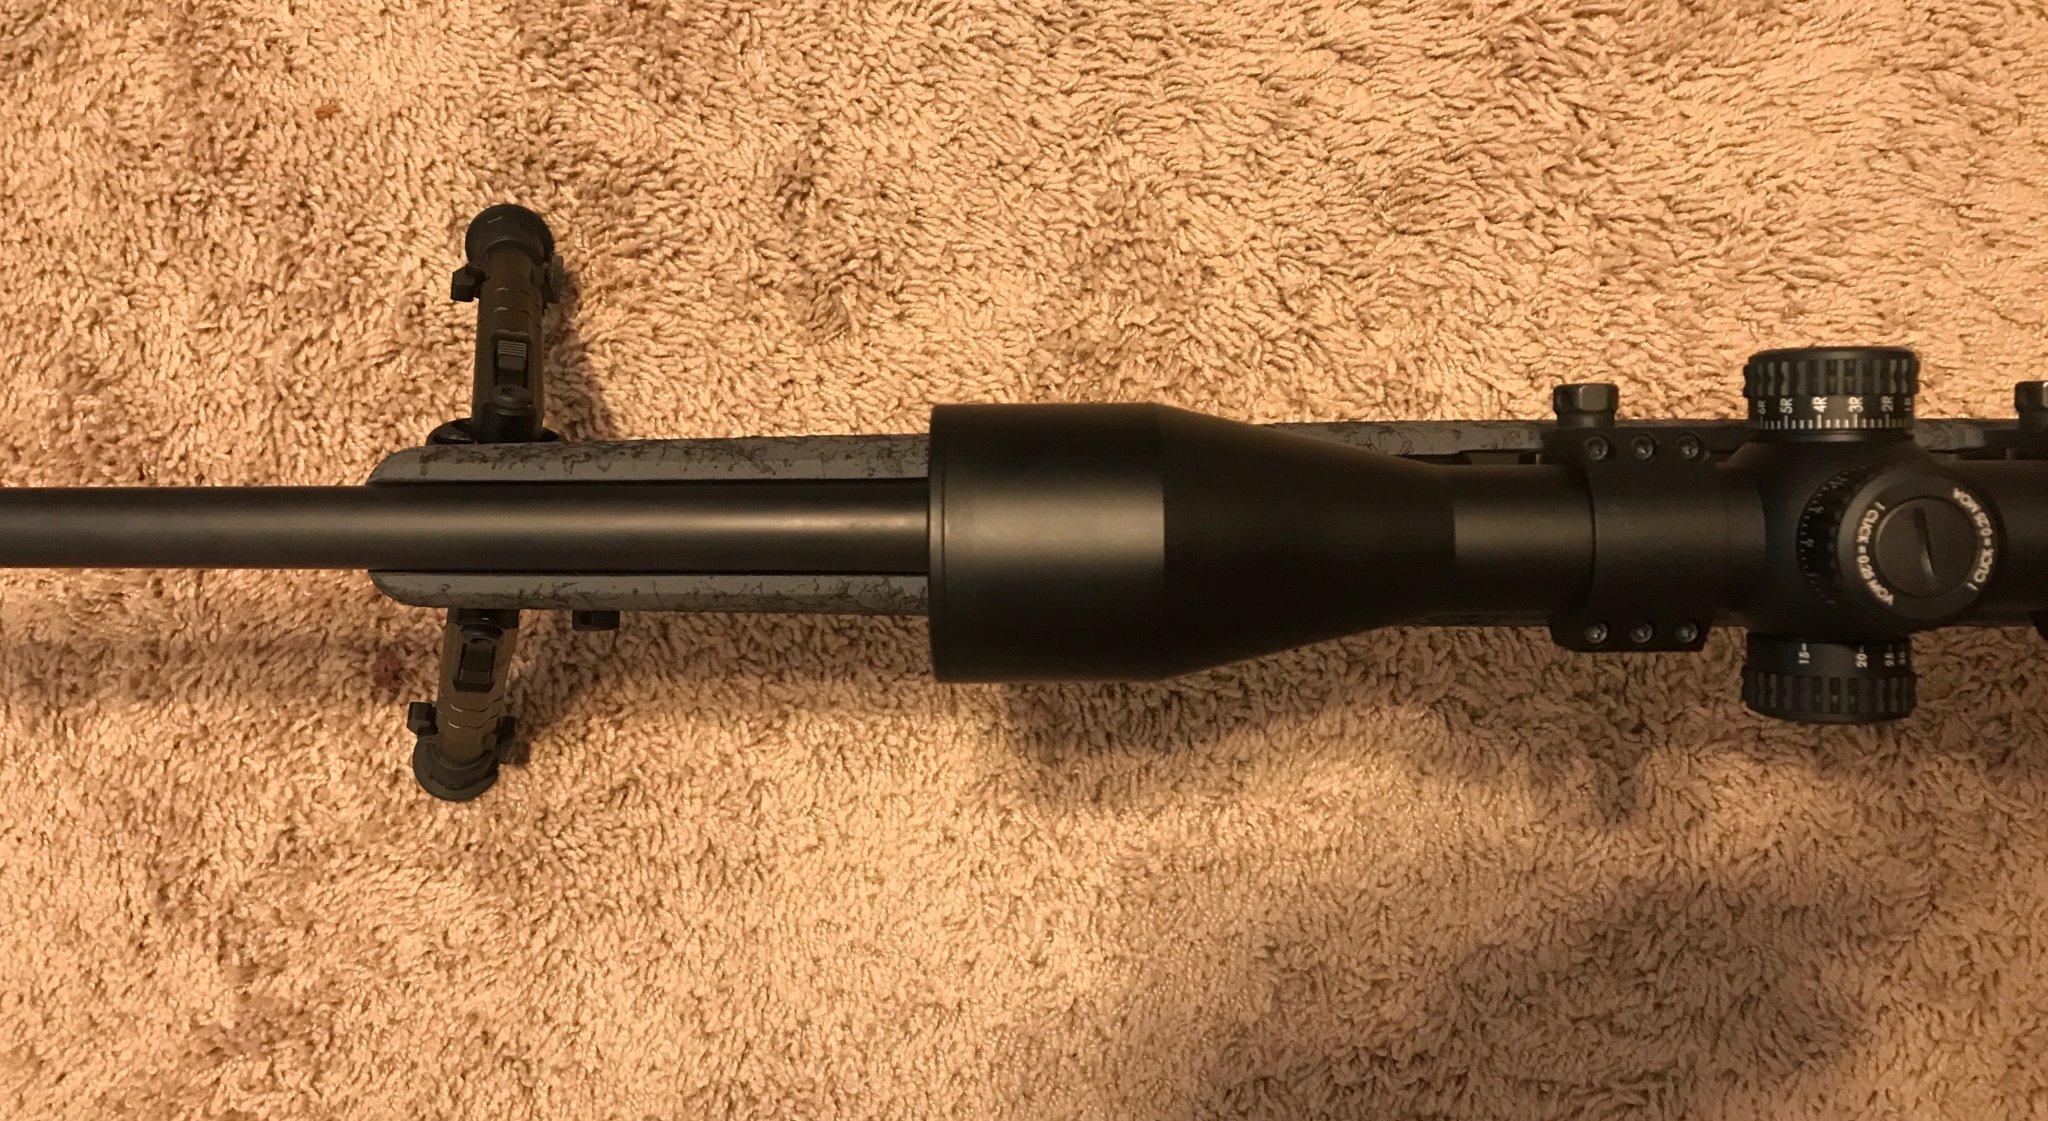 Rifle Scopes - Scope Not Aligned with Barrel | Sniper's Hide Forum